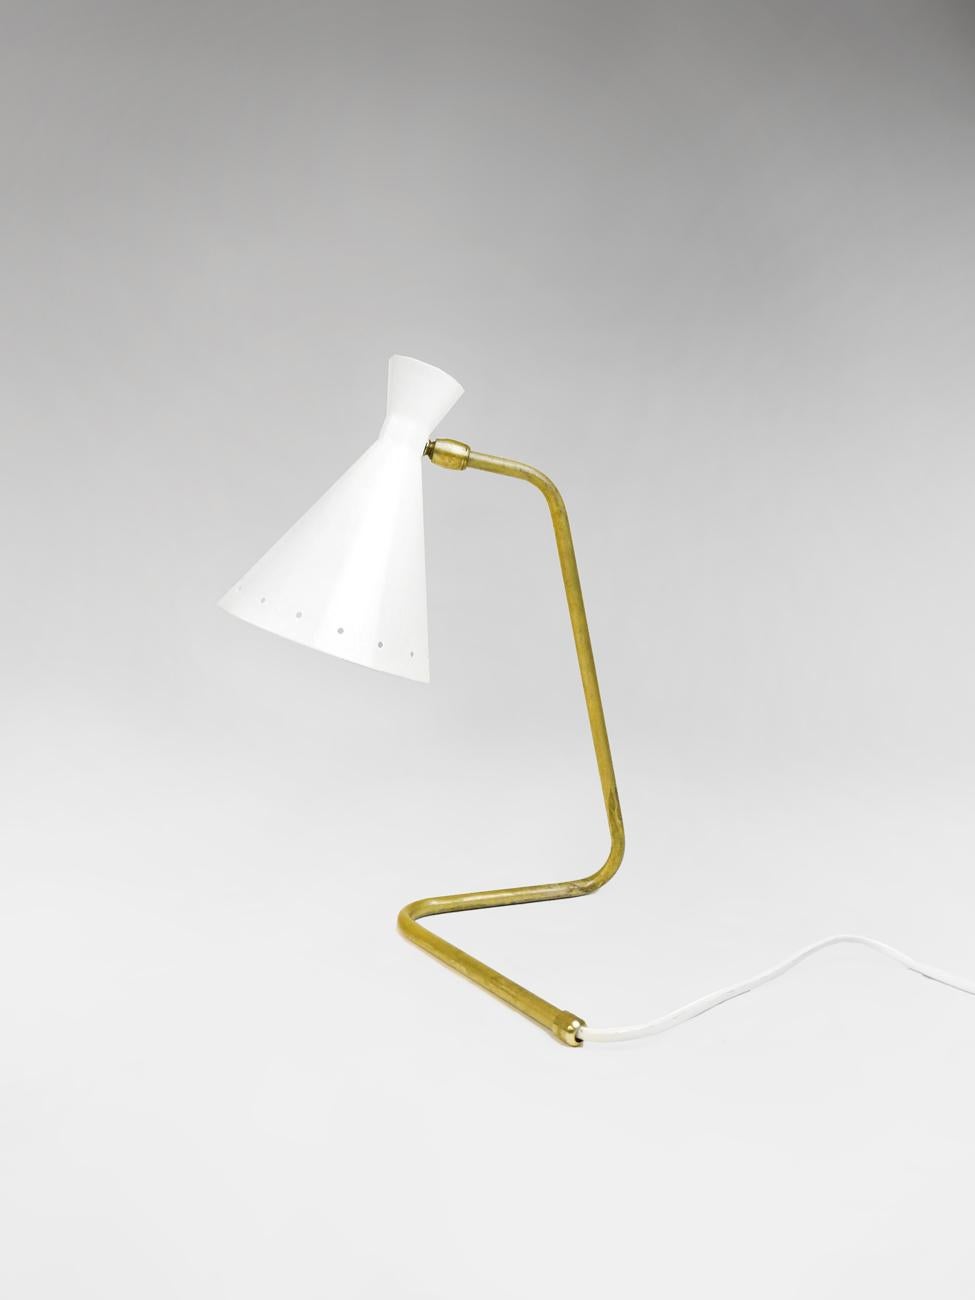 Elegant sculptural table lamp shown in un-lacquered natural brass with ivory shade fabricated in Italy by Fabio Ltd. 

This is a modern, contemporary interpretation of a classic design, strongly influenced by Italian Mid-Century Modernism such as